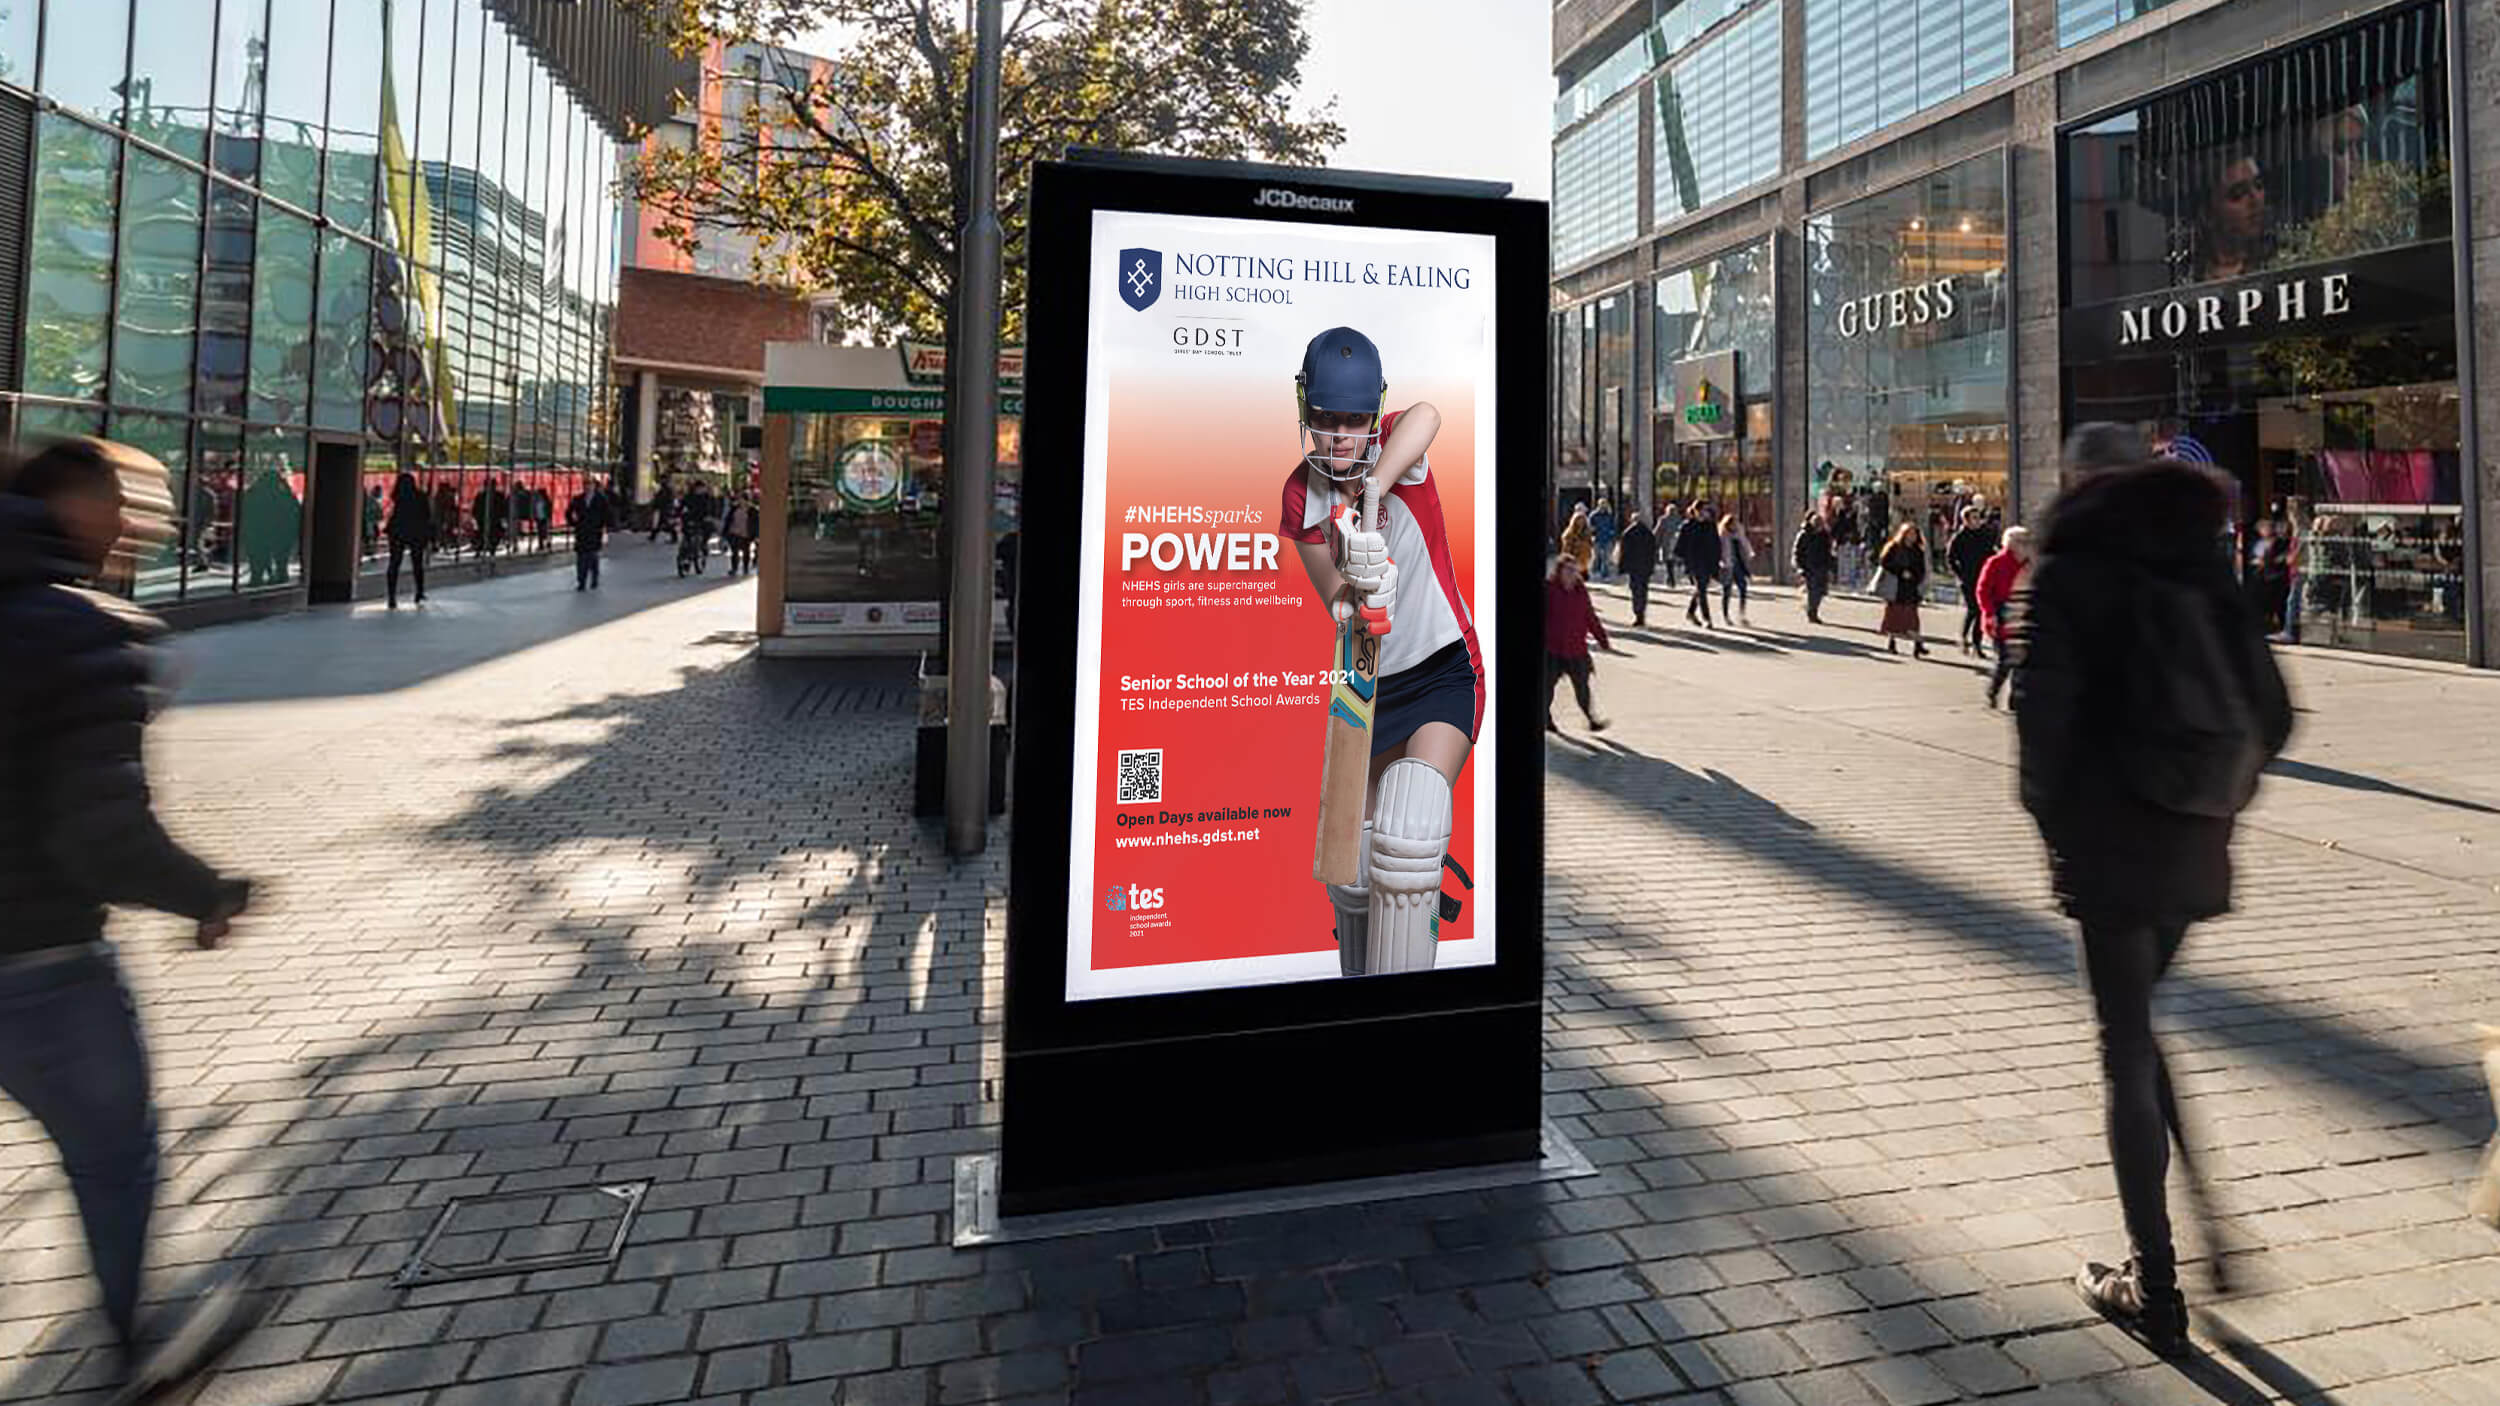 Notting Hill & Ealing High School for Girls 'Sparks Power' campaign digital screen